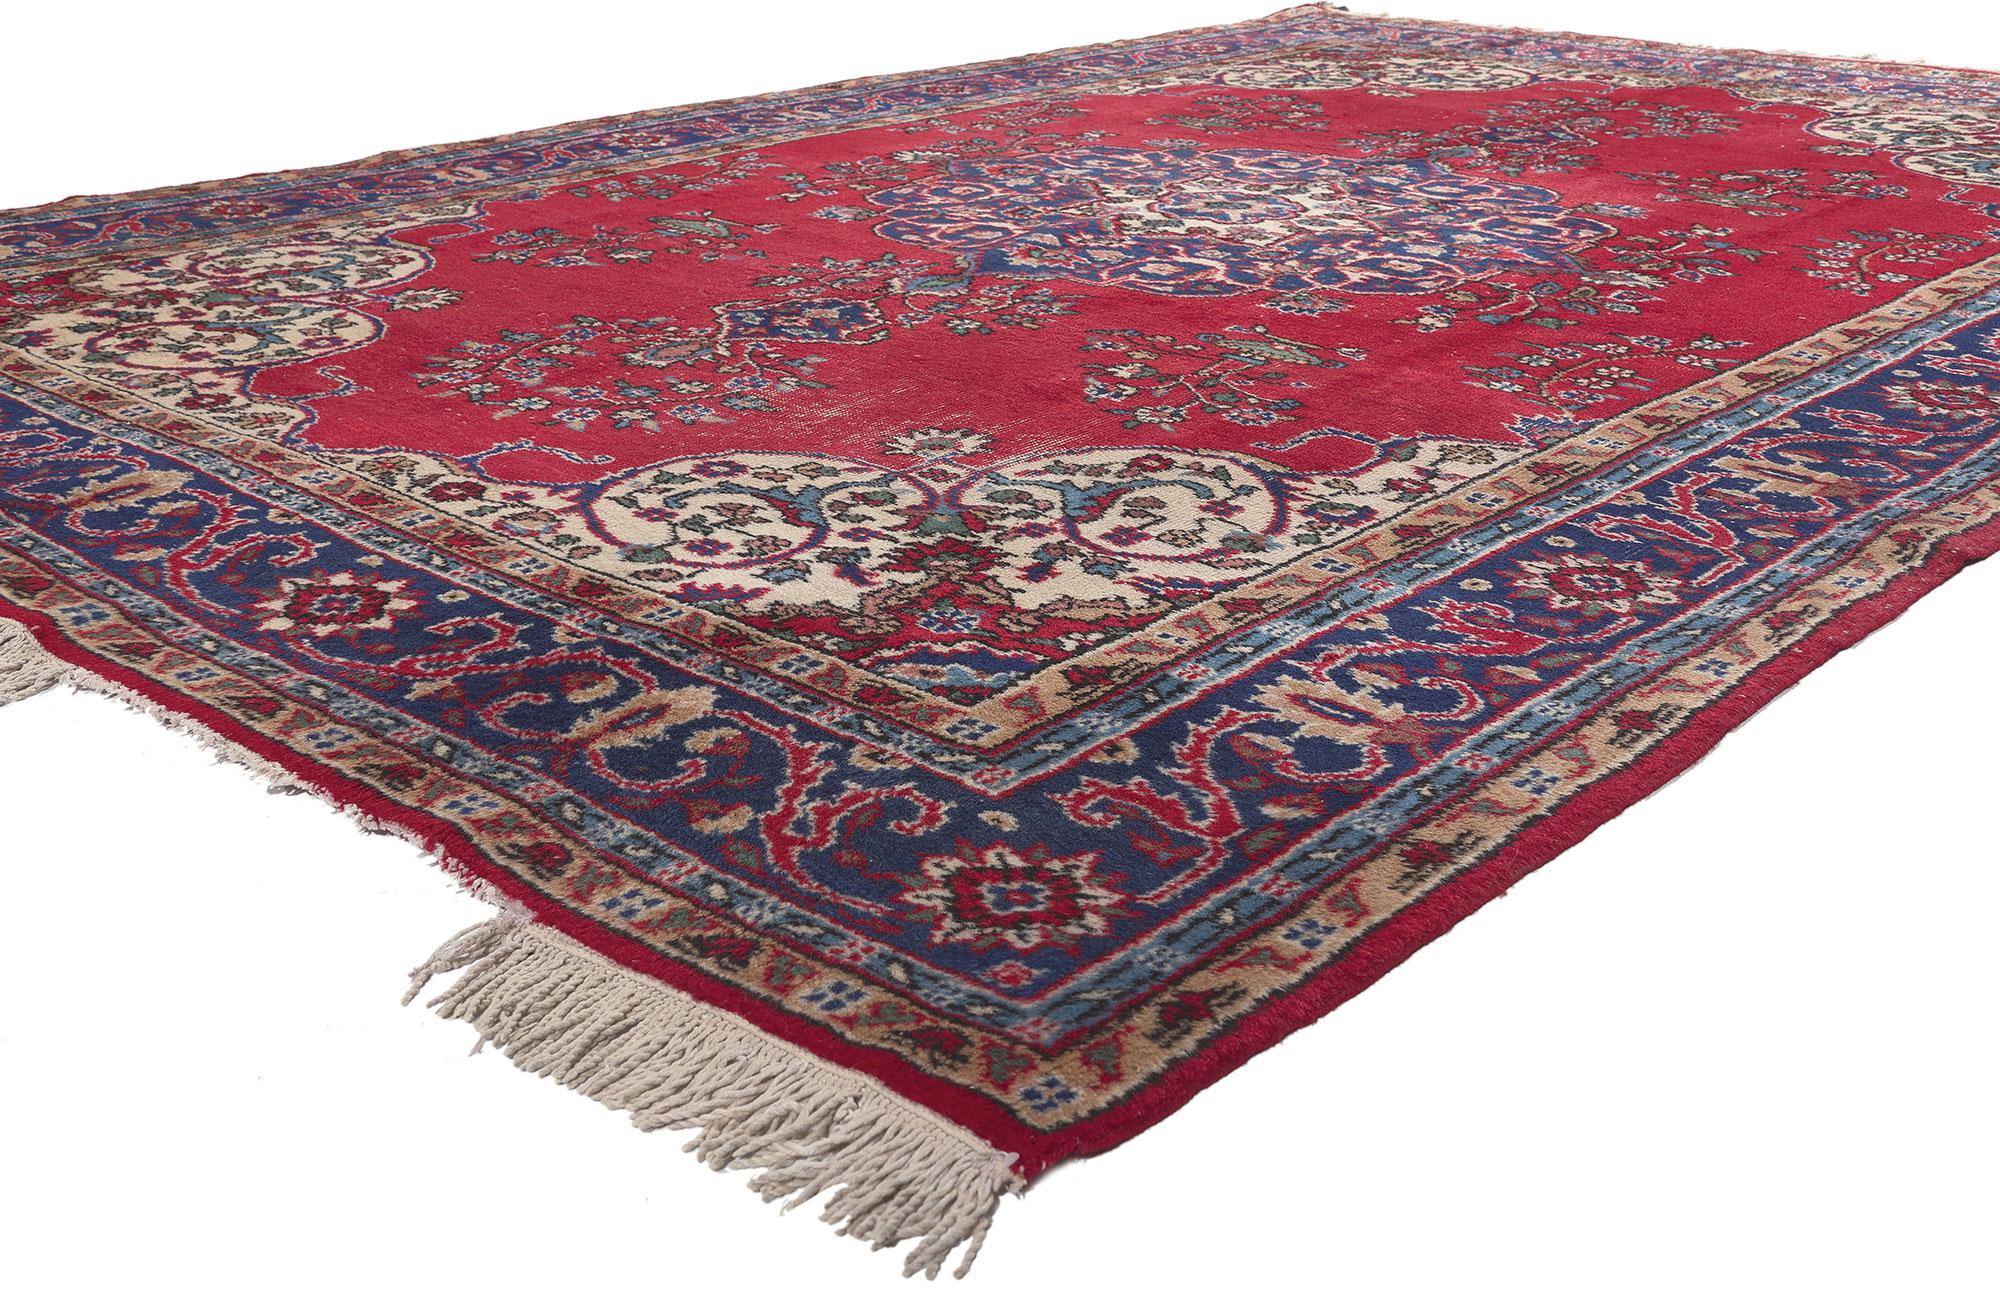 78140 Vintage Turkish Sparta Rug, 07'07 x 11'01. 
Emulating traditional sensibility and refined elegance, this vintage Turkish Sparta rug appears like a sumptuous Italian velvet, recalling the rich and luxurious design furnishings of a bygone era